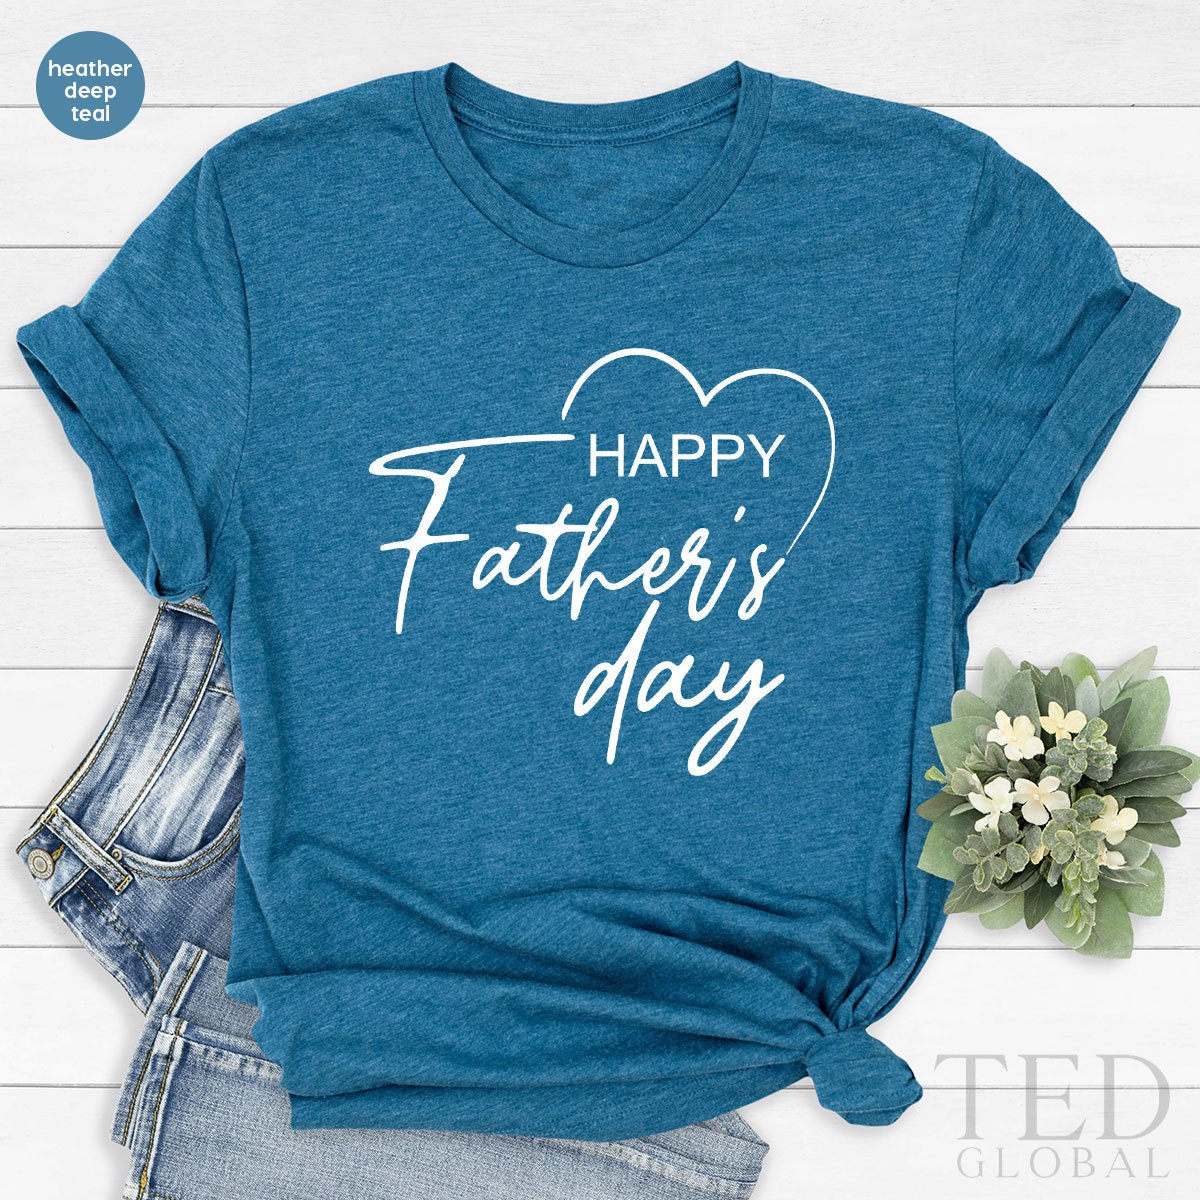 Happy Fathers Day Shirt, New Dad Gift, Fathers Day Gift From Kids, Dad Shirt, Gift For Dad, Daddy T Shirt, Grandpa Shirt, Gift For Husband - Fastdeliverytees.com